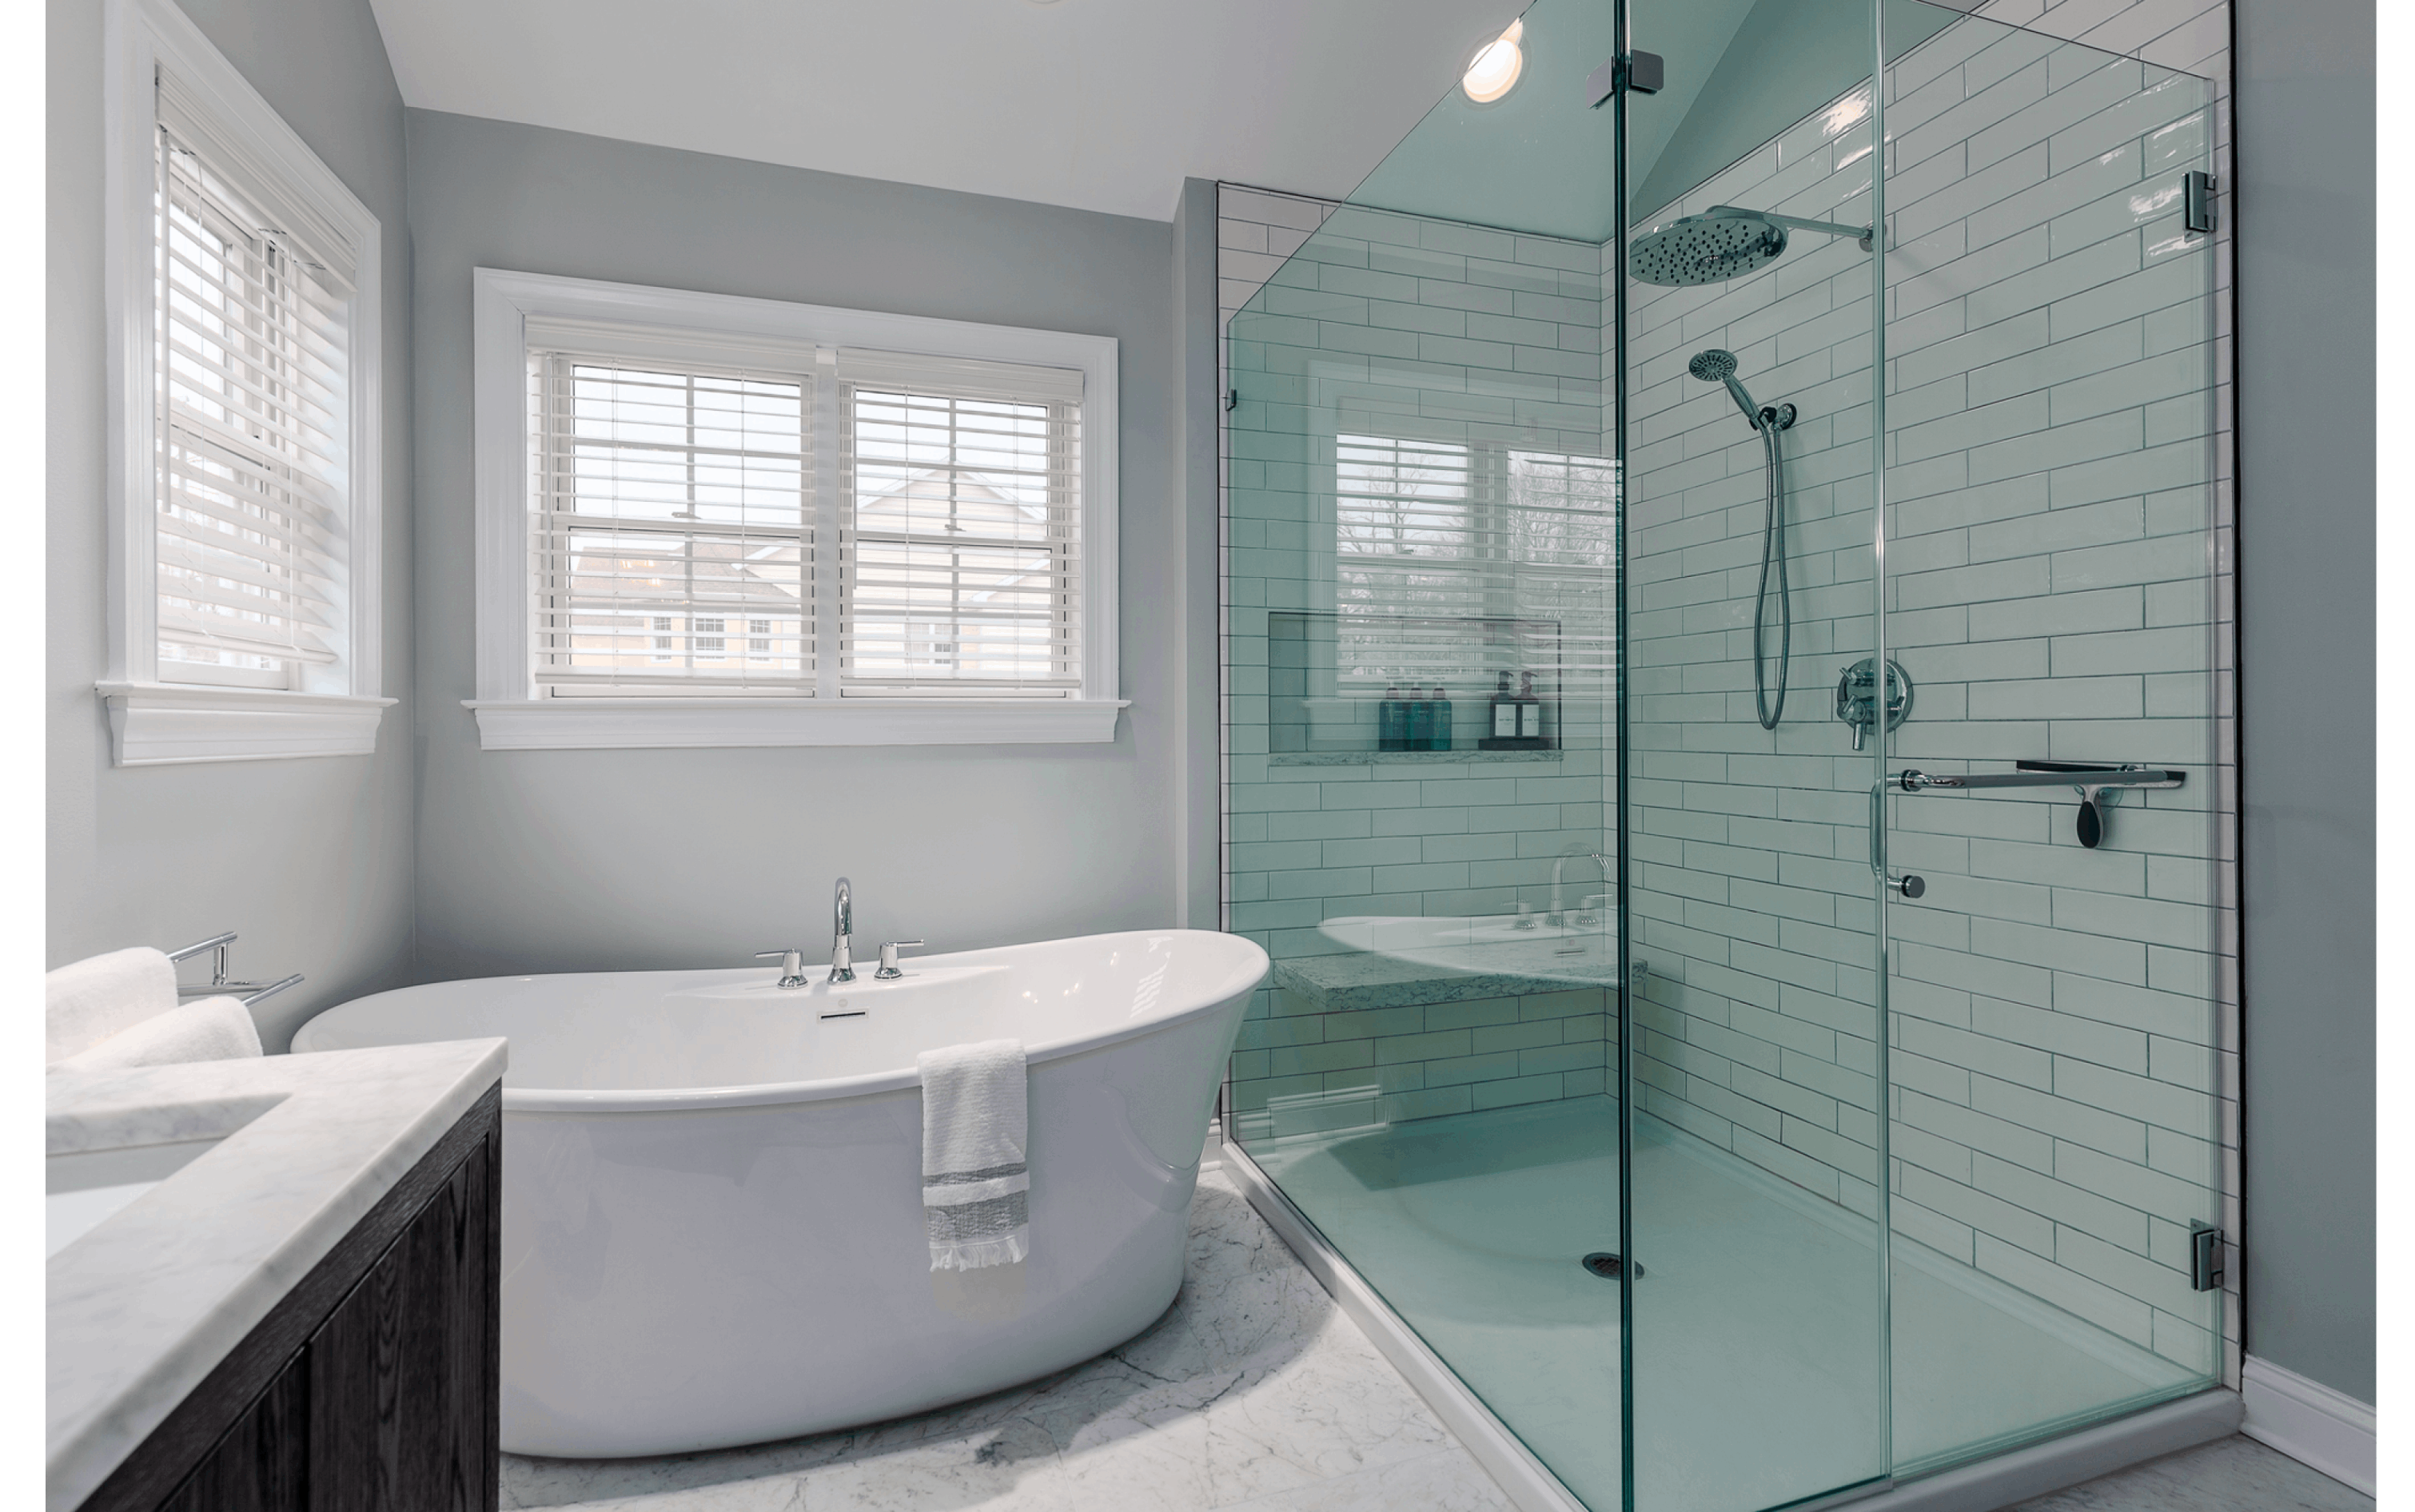 Neutral grey bathroom upgrade with large soaking tub, glass shower, and multiple windows letting in ample natural light